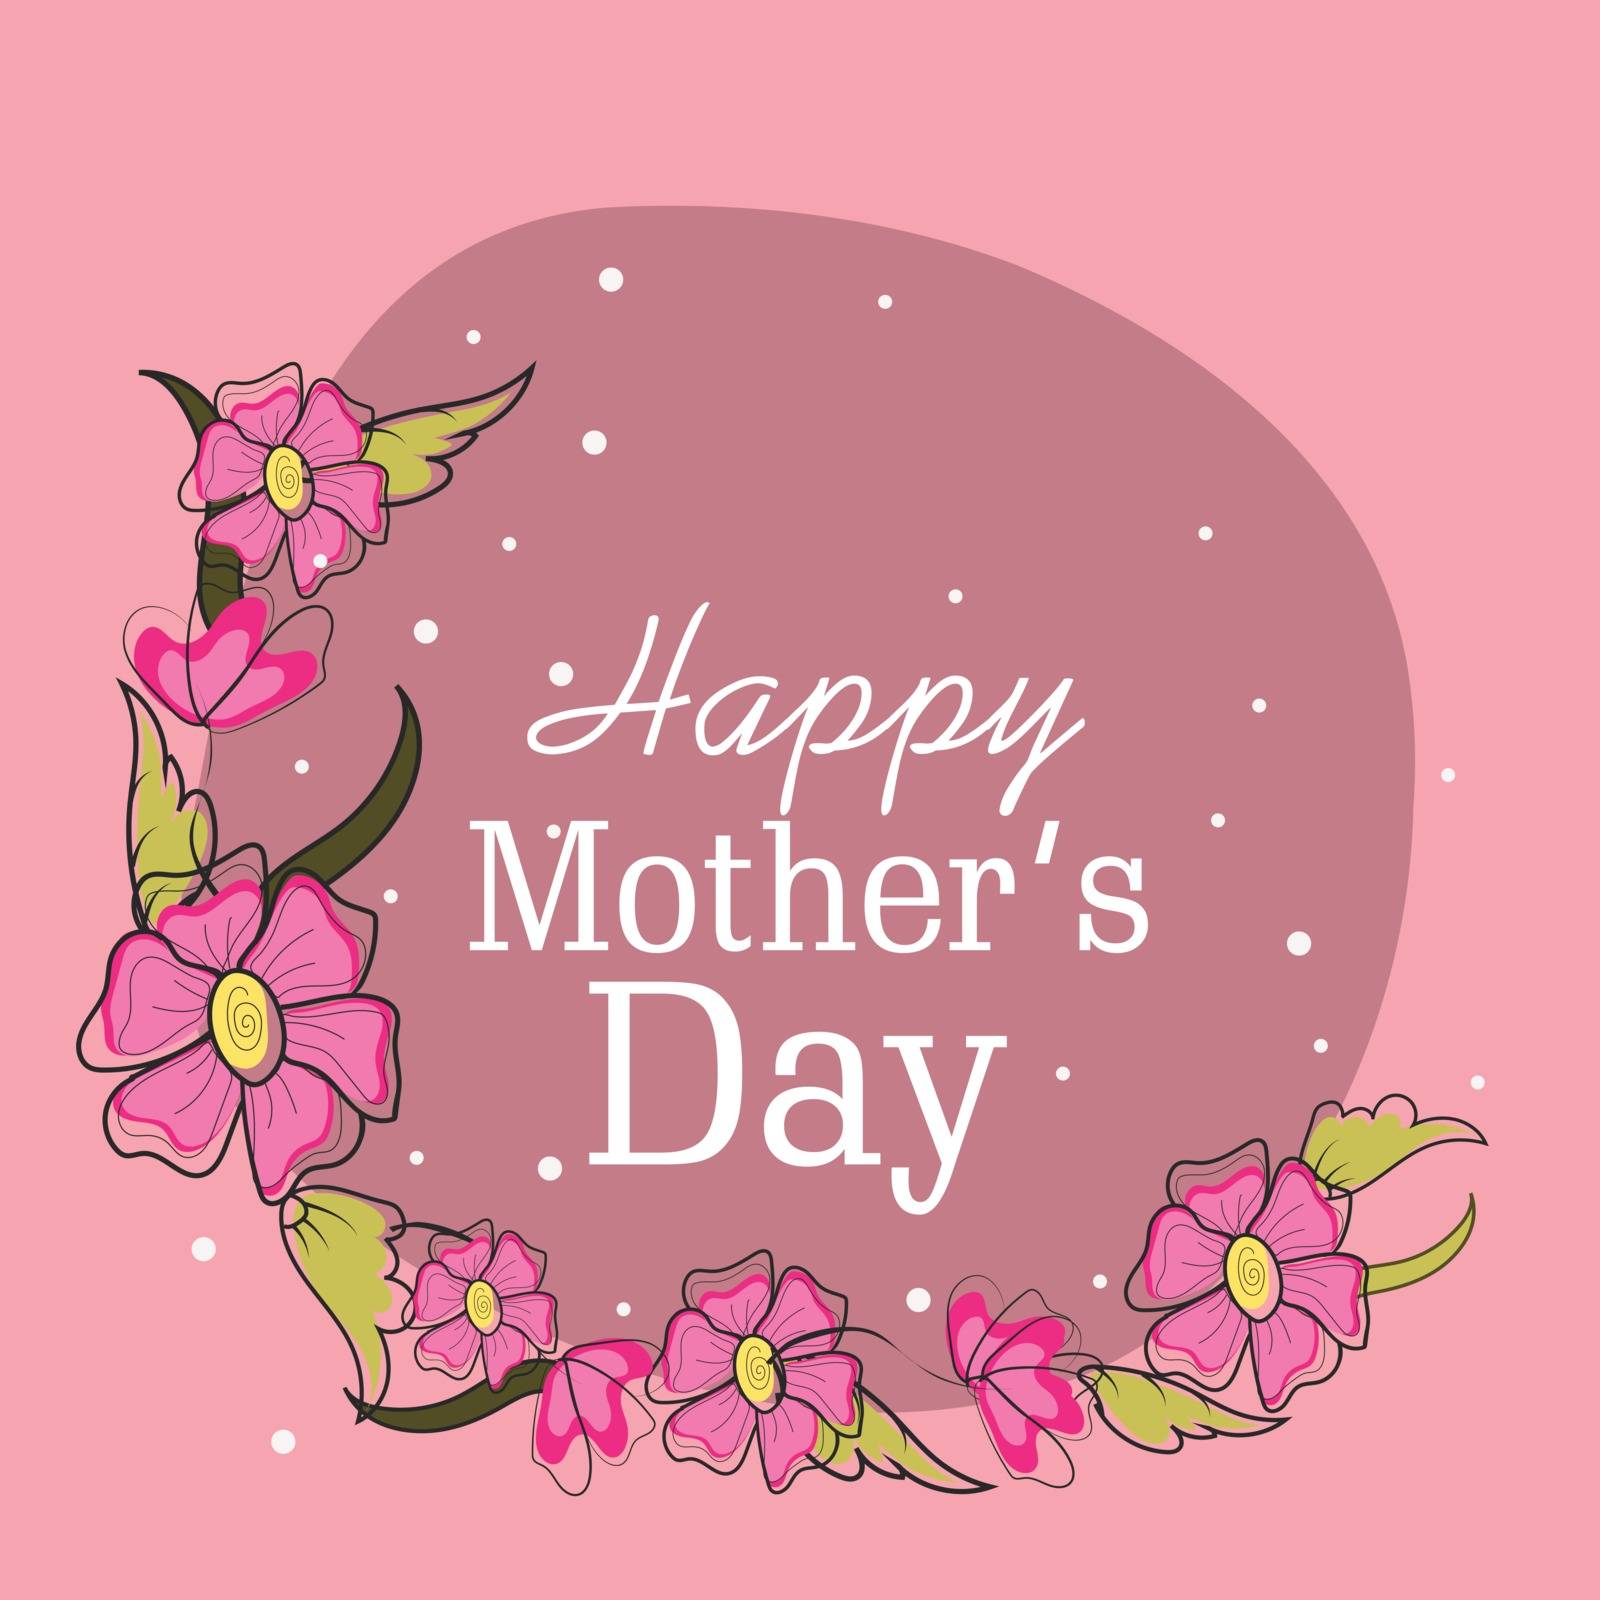 Happy Mother's Day background with pink flowers. by aispl